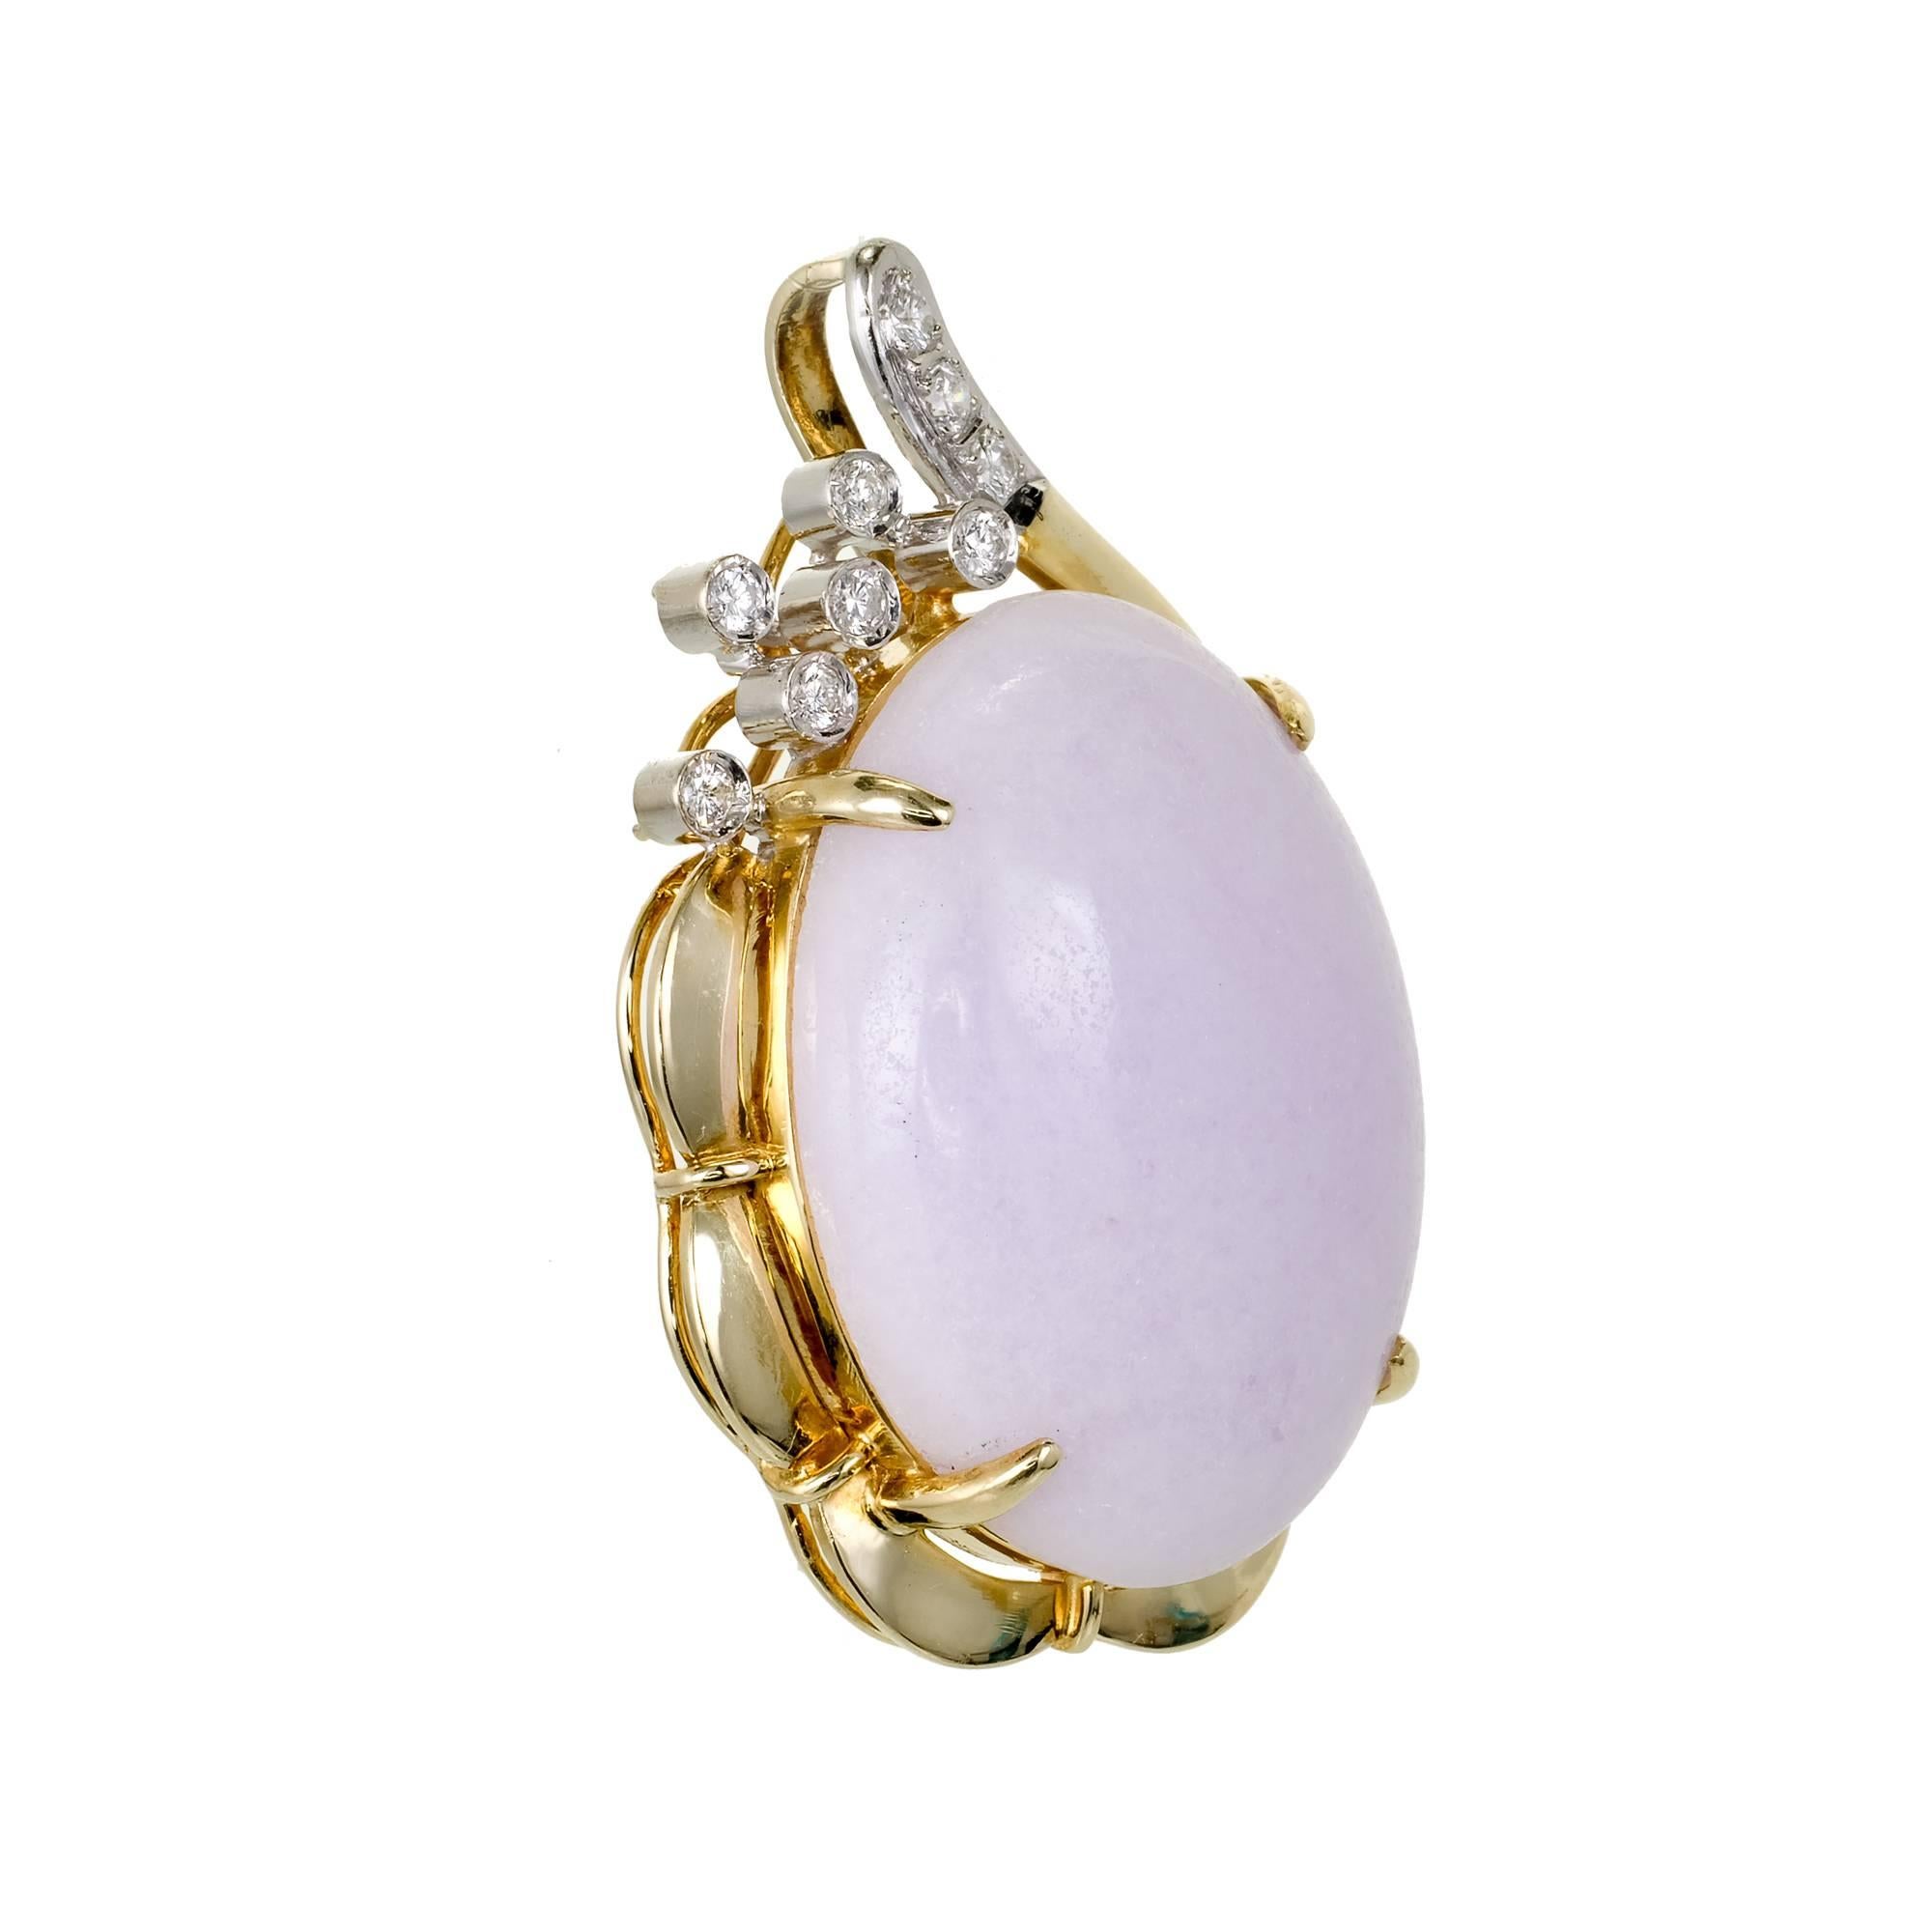 Large natural purple Jadeite Jade pendant in a 14k yellow and white gold swirl handmade setting with bright white full cut Diamond accents.

1 oval cabochon purple Jadeite Jade, 26.98 x 20.2 x 8.3mm
9 round Diamonds, approx. total weight .20cts, H,